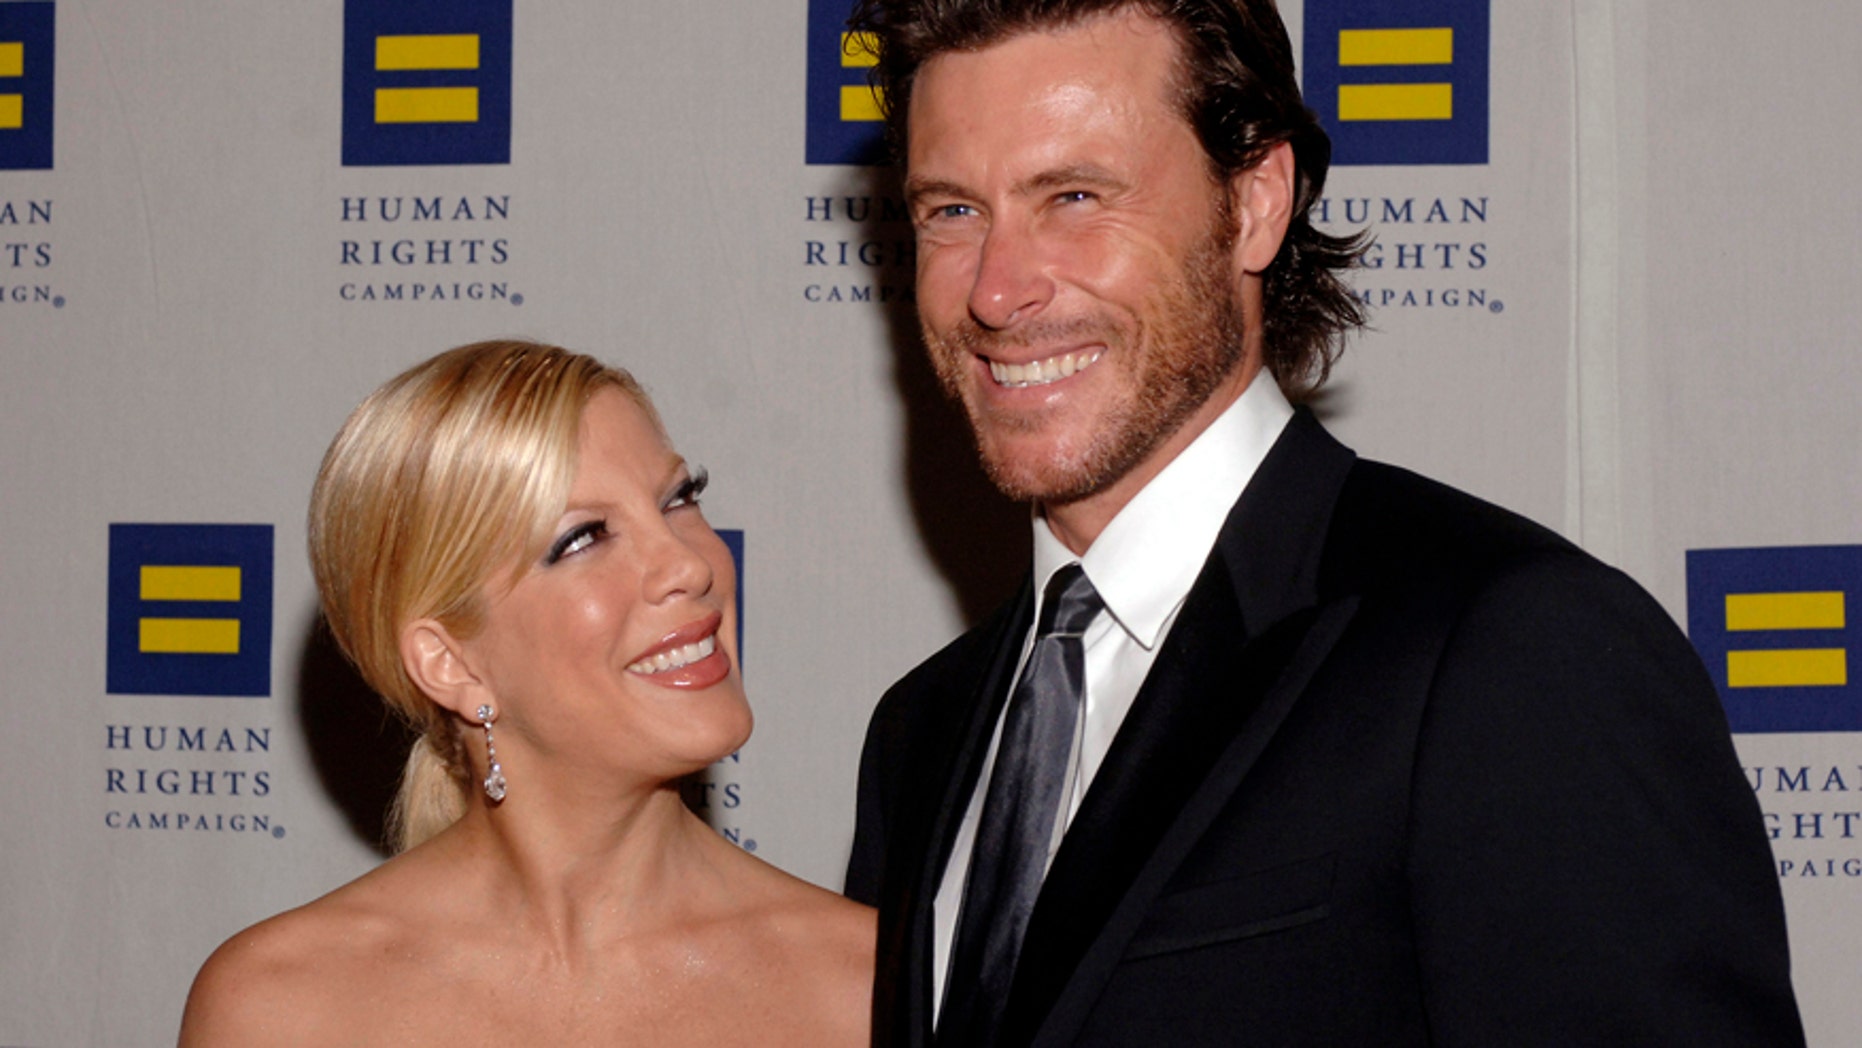 Tori Spelling And Dean Mcdermott Have Started Counseling To Work On